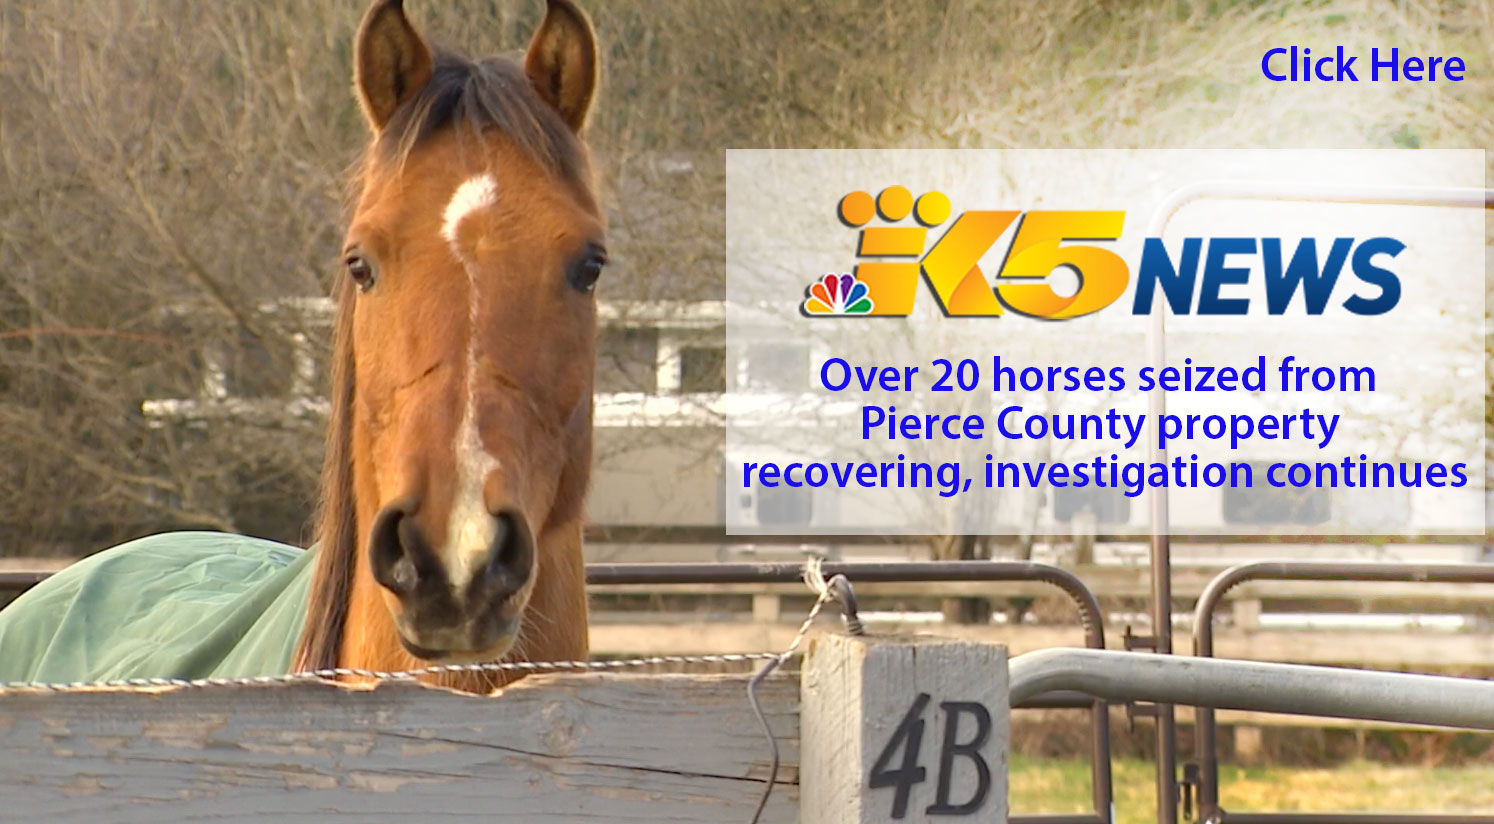 King 5 News: Over 20 horses seized from Pierce County property recovering